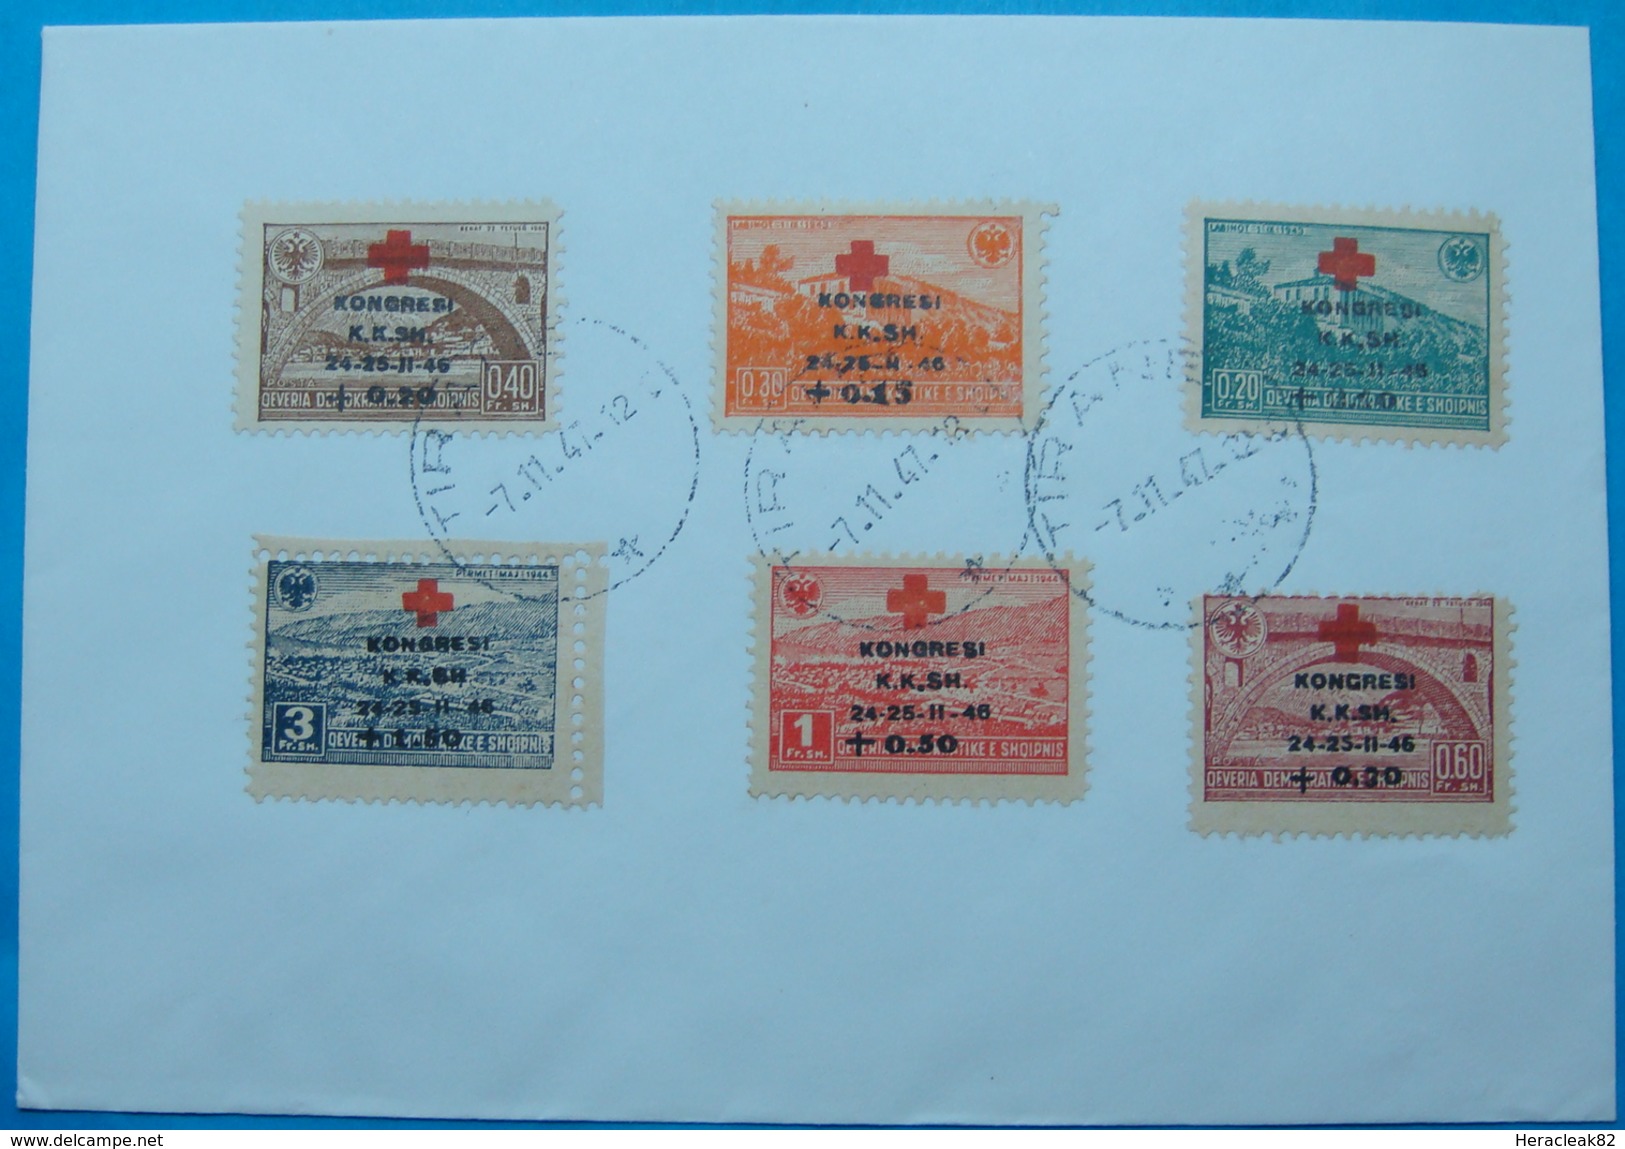 1947 ALBANIA 6 STAMPS RED CROSS KONGRESS 1946 ON COVER, CANCELLATION TIRANA - Albanien